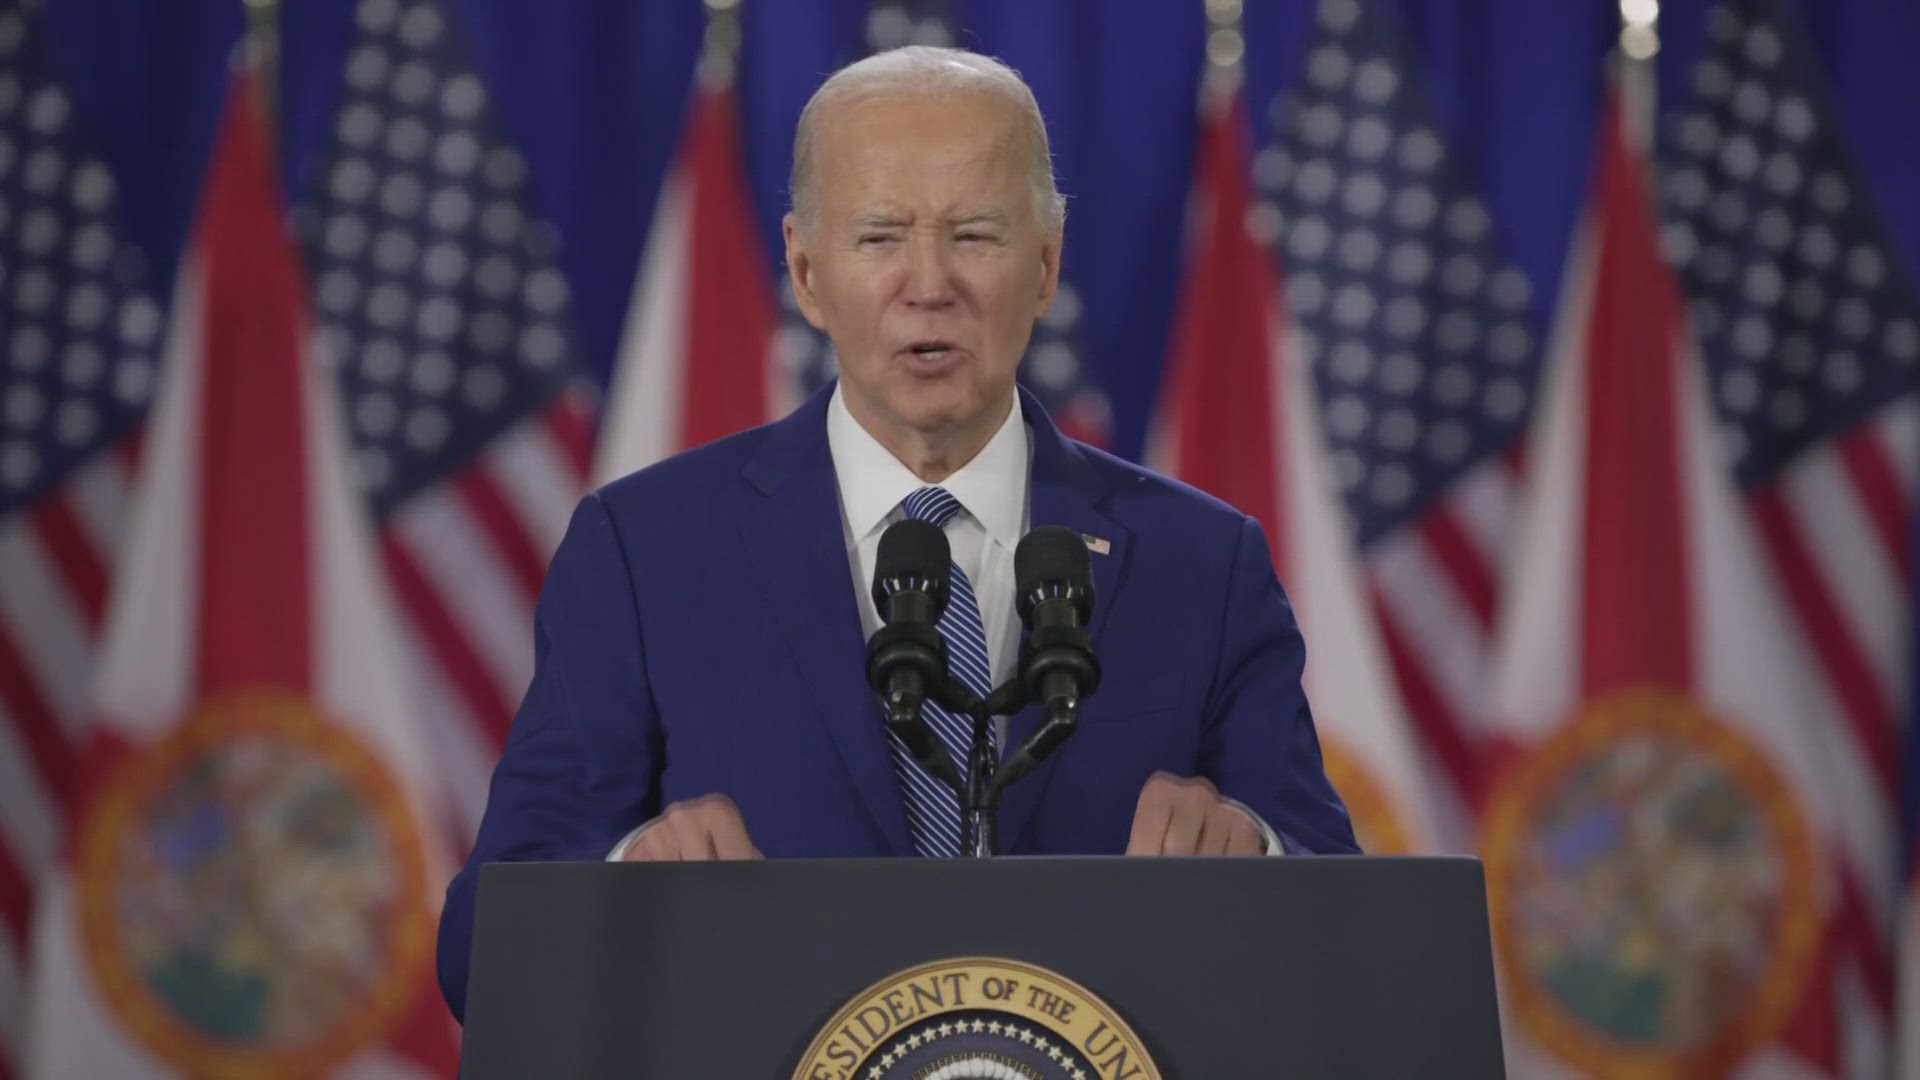 Biden talked about making abortion a Constitutional right during a speech in Florida.